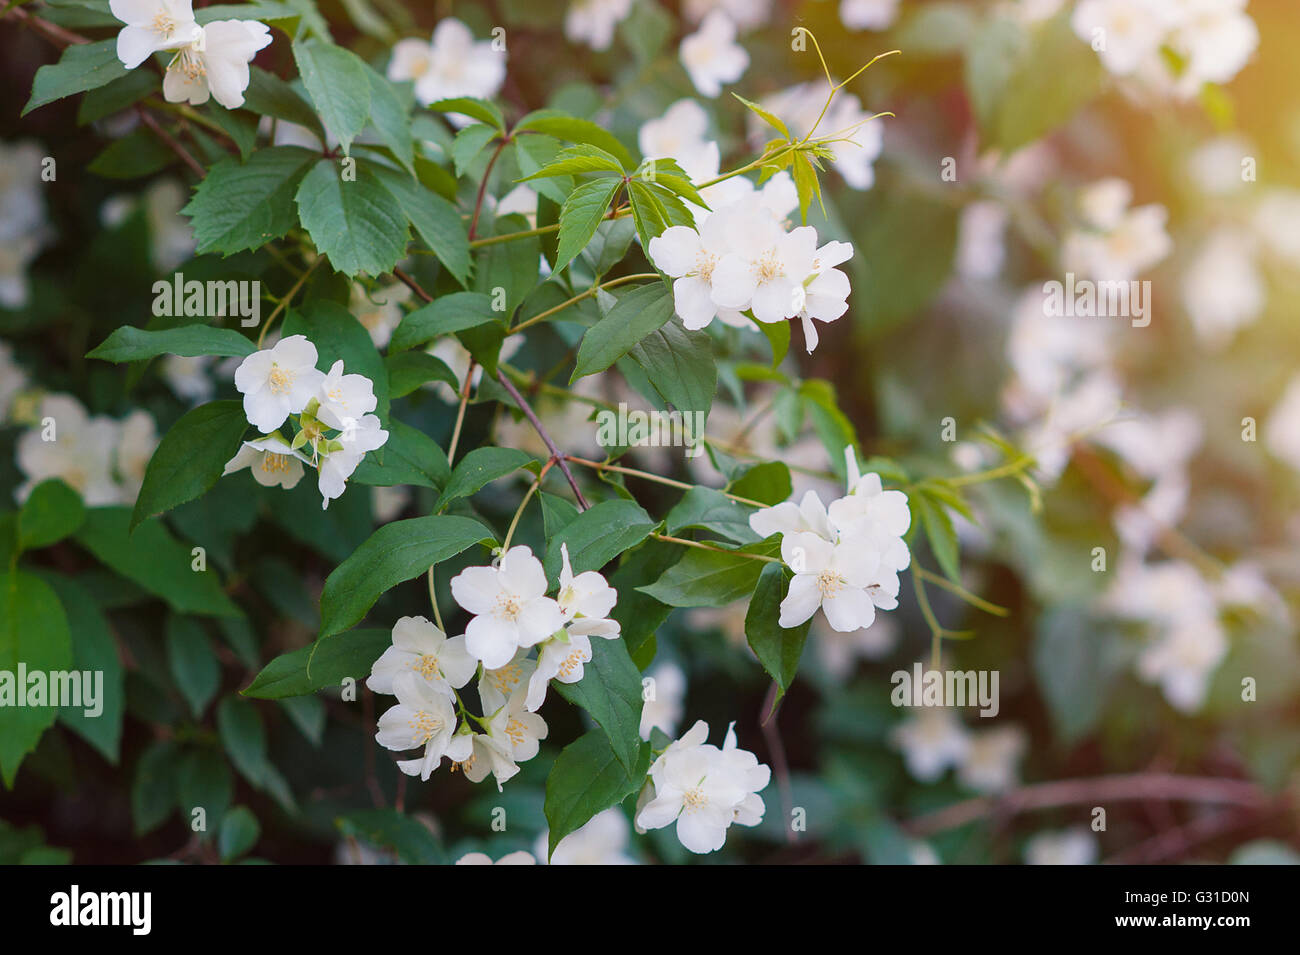 White jasmine flowers on a tree in the park Stock Photo